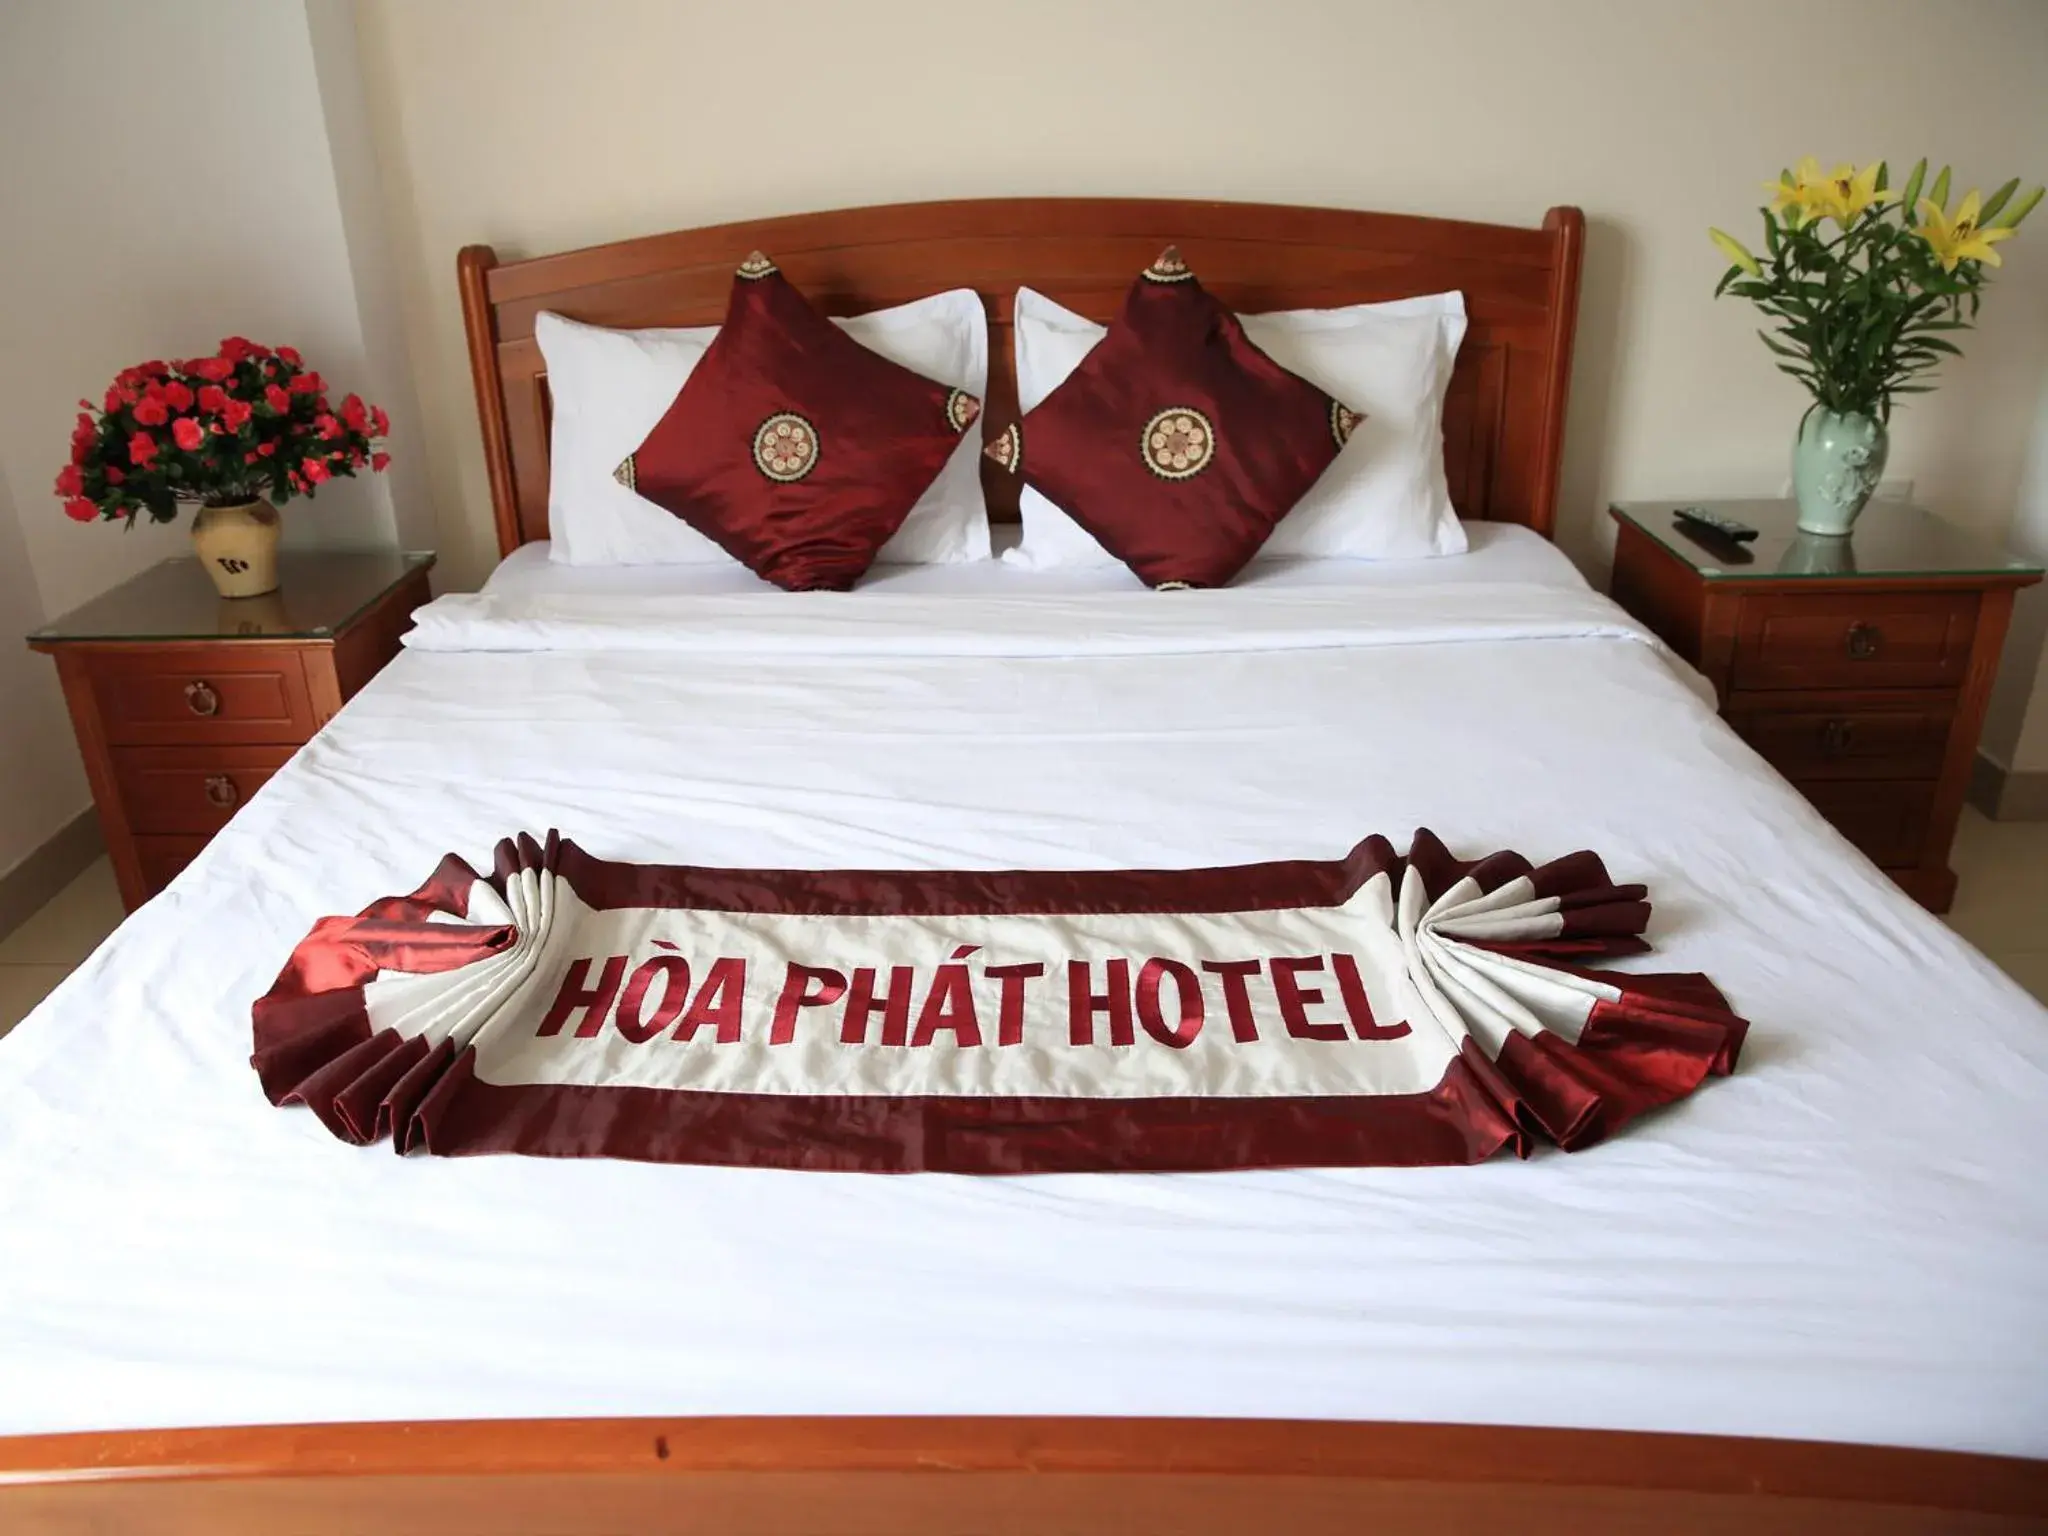 Bed, Room Photo in Hoa Phat Hotel & Apartment